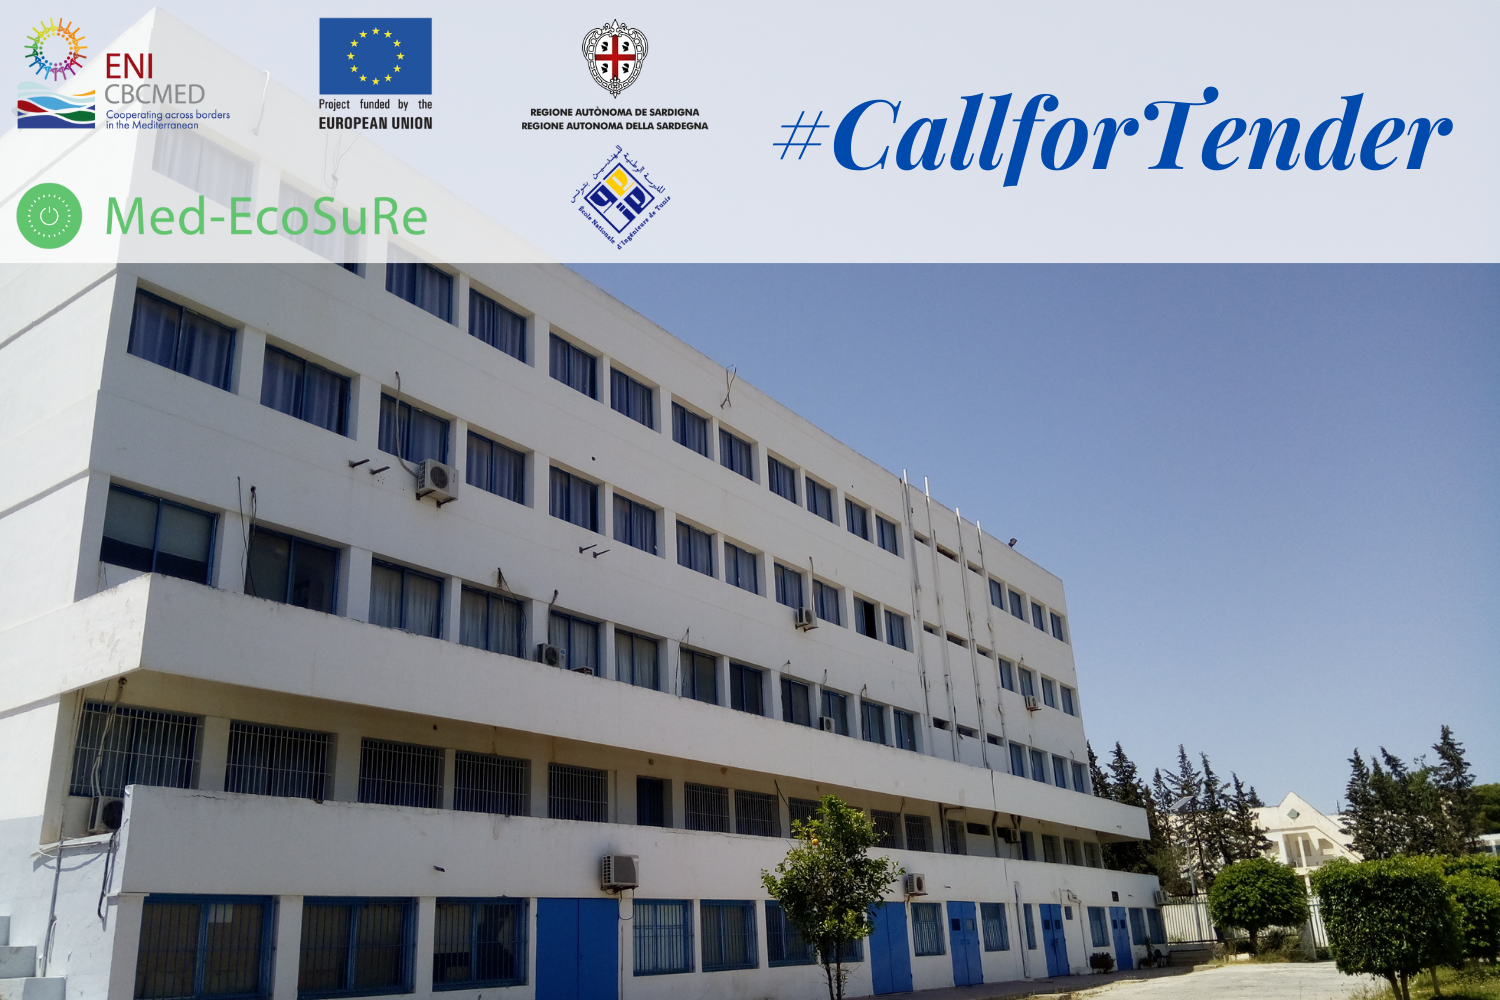 Med-EcoSuRe launches a call for tender in Tunisia for the supply and installation of a rooftop solar photovoltaic system